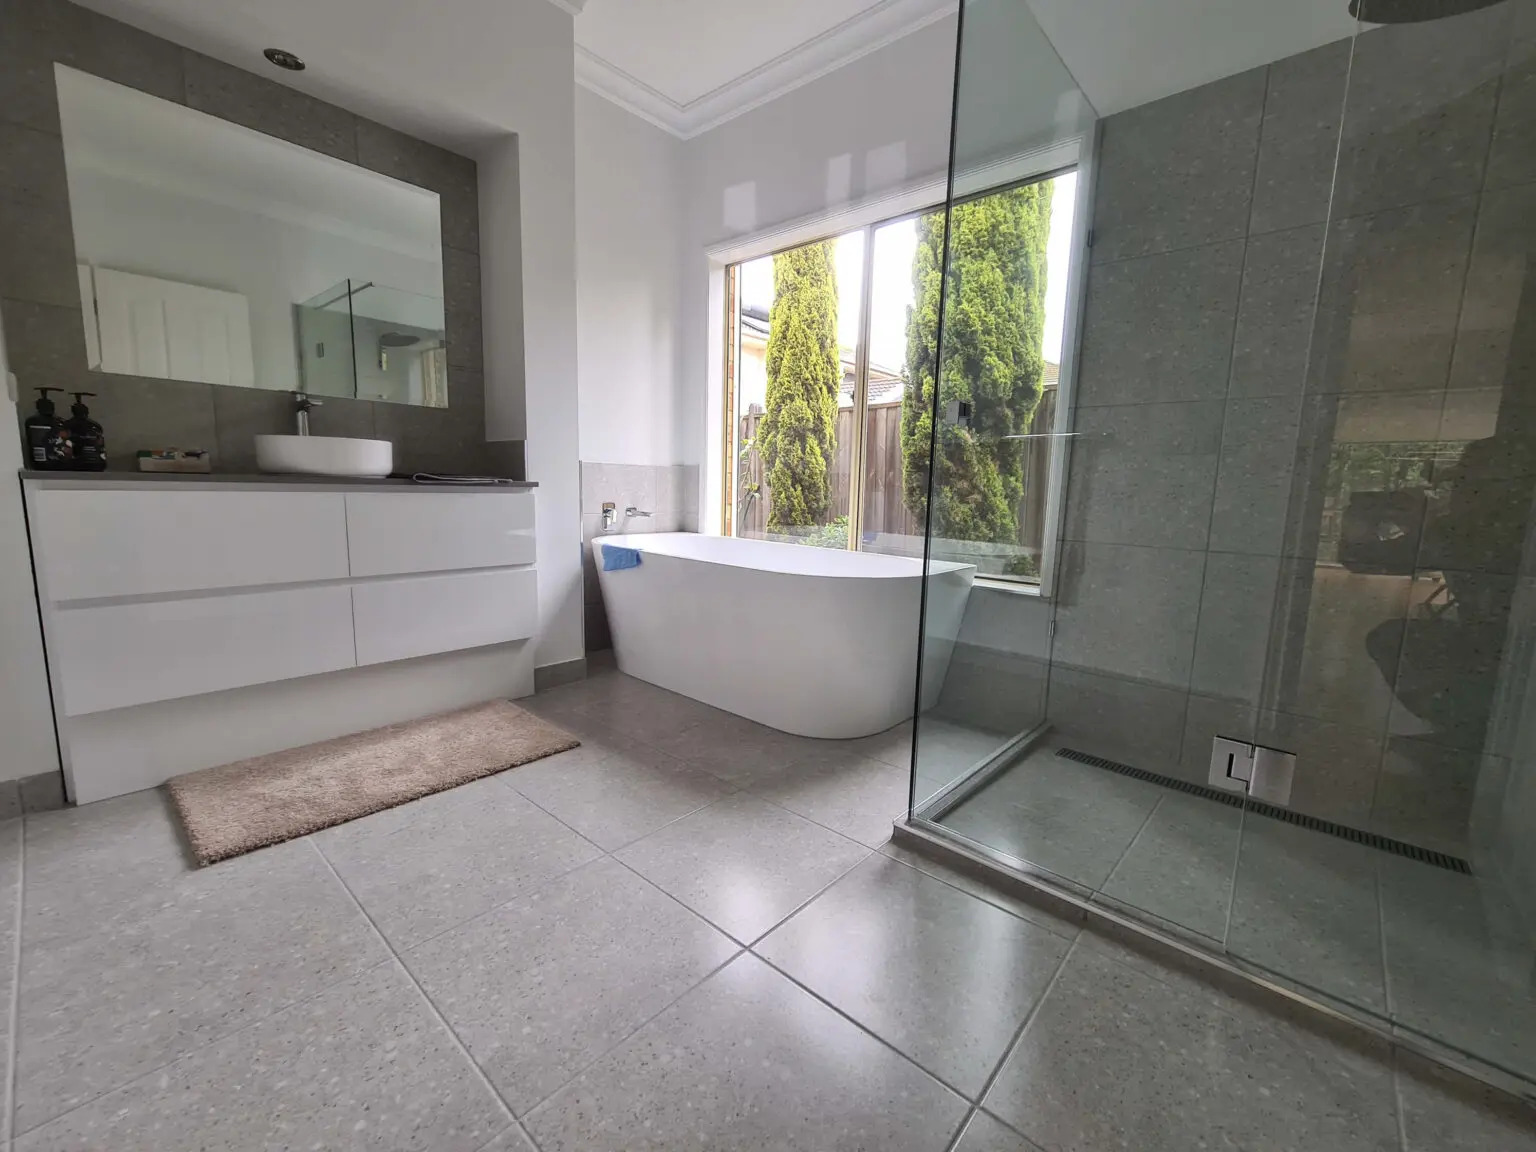 Transform Your Home with Stunning Bathroom Renovations in Melbourne - Wiki Blog